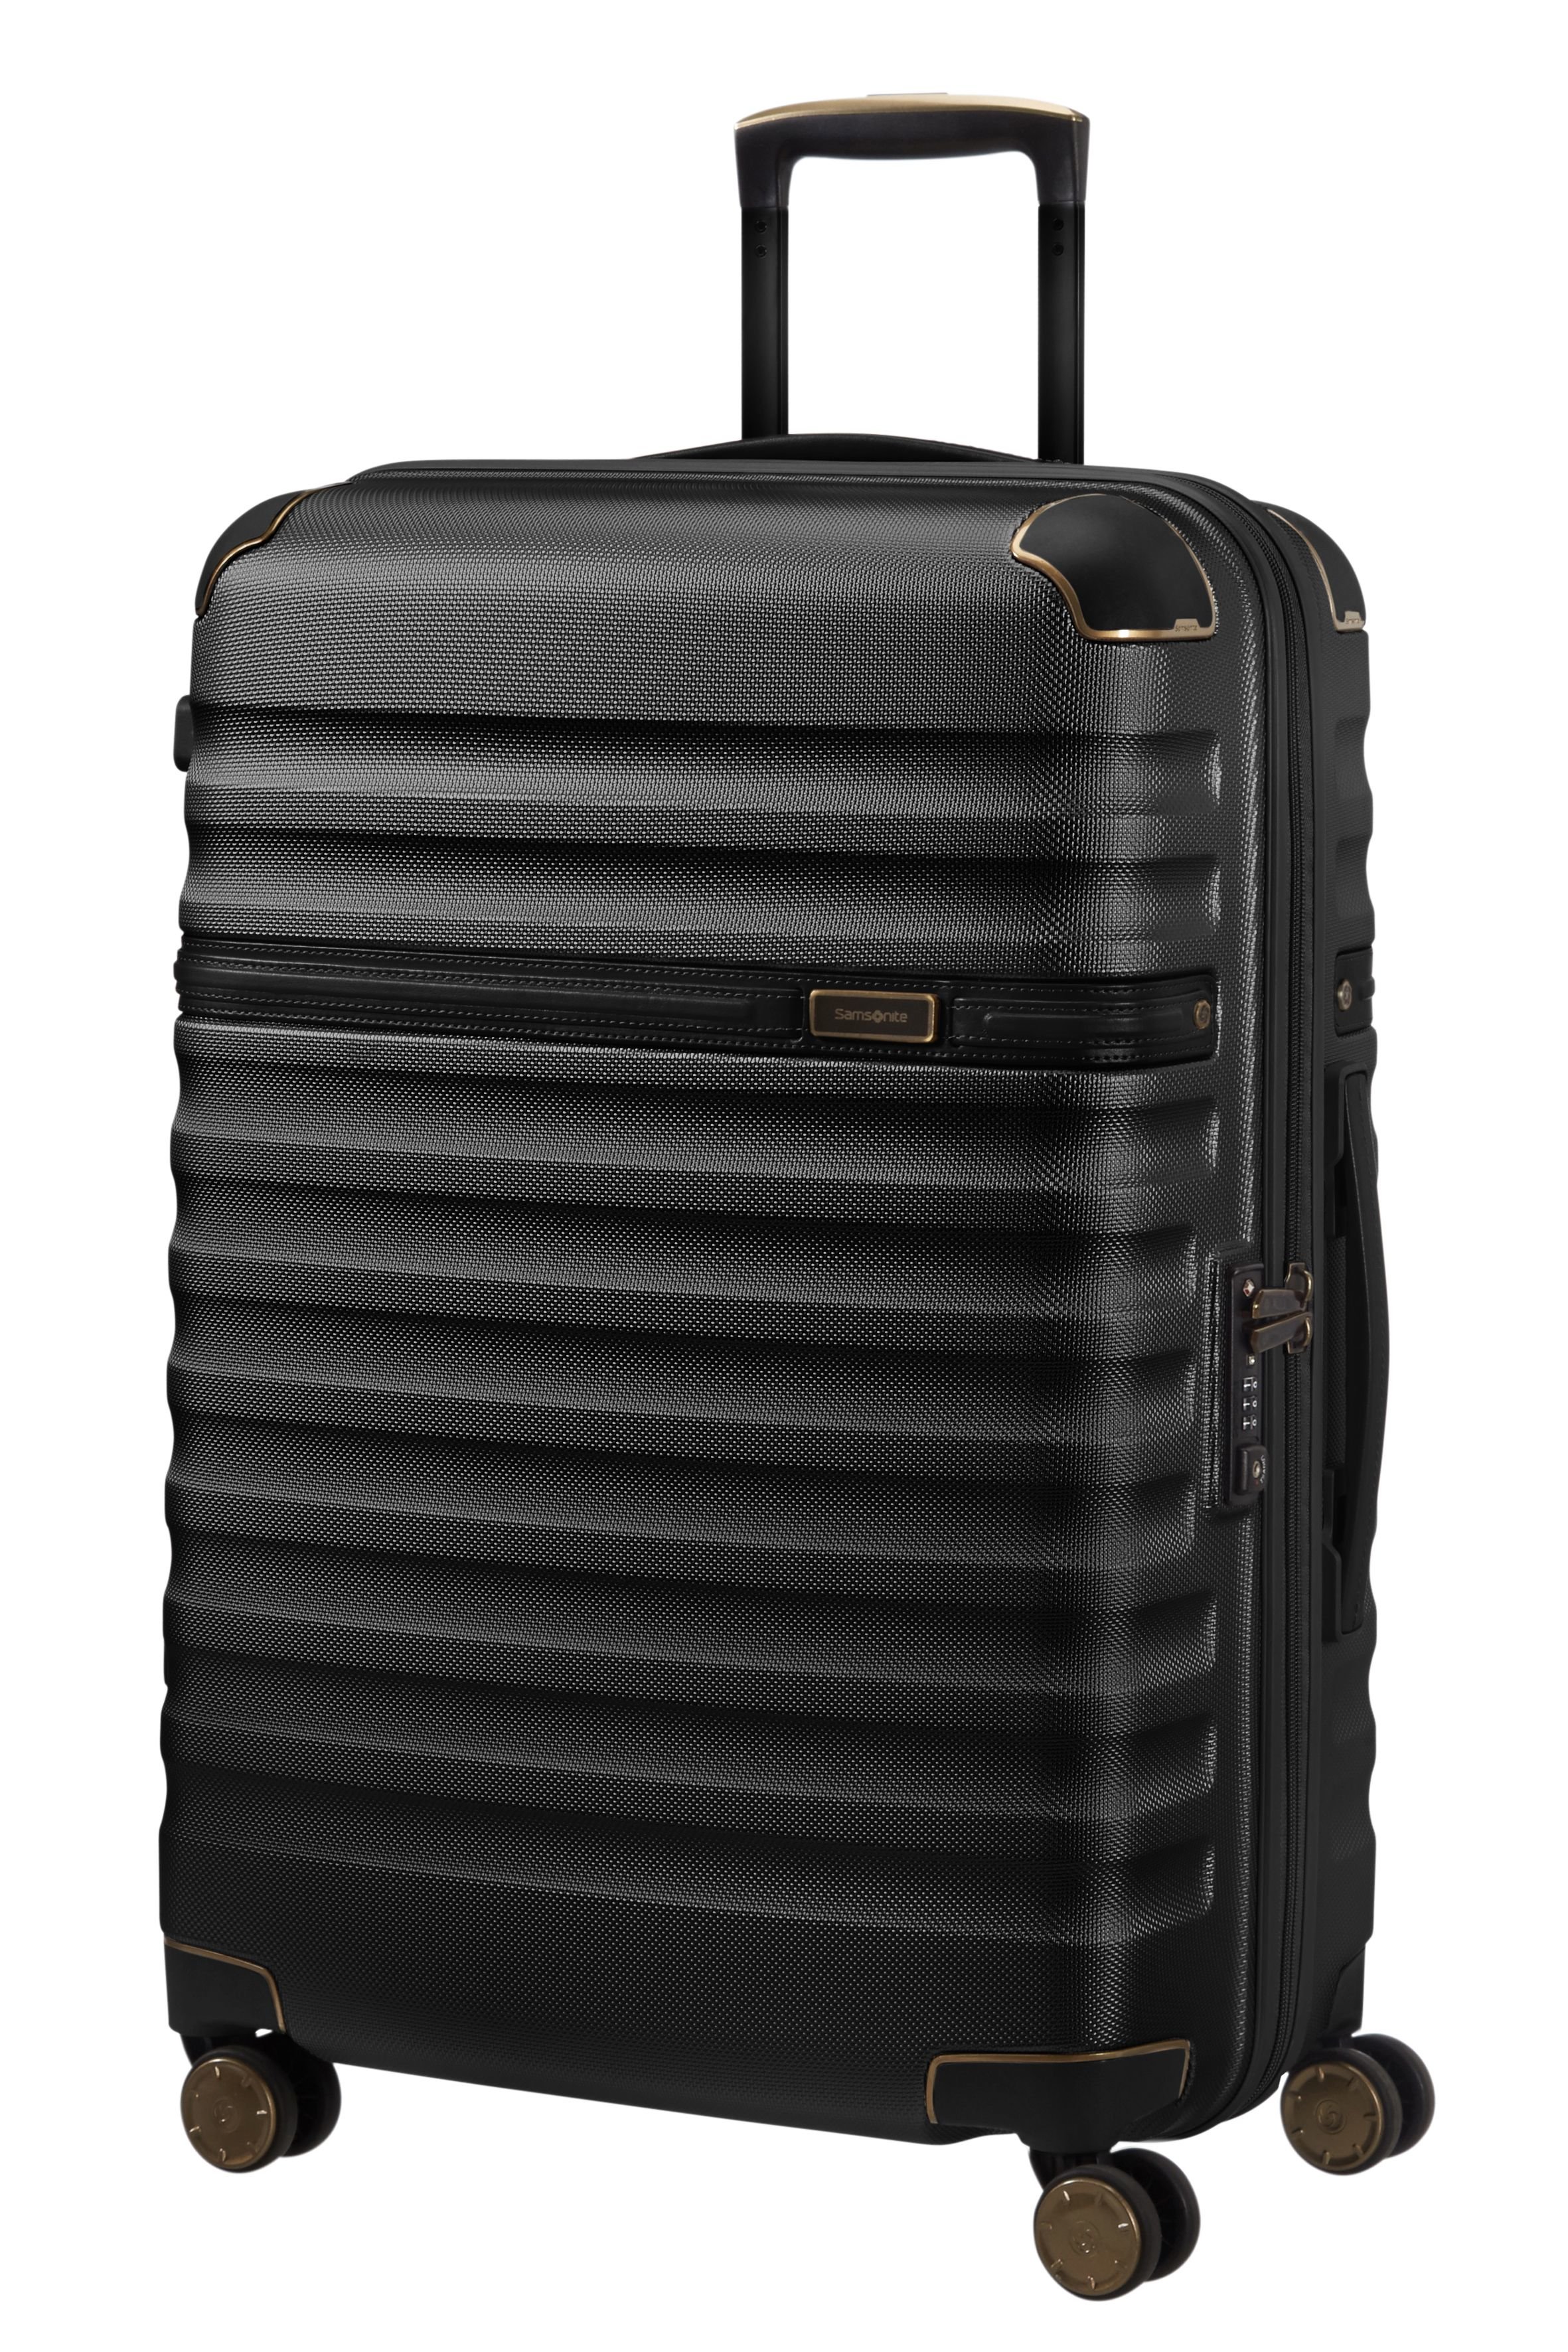 How to Spot a Fake Samsonite Suitcase - Luggage Unpacked